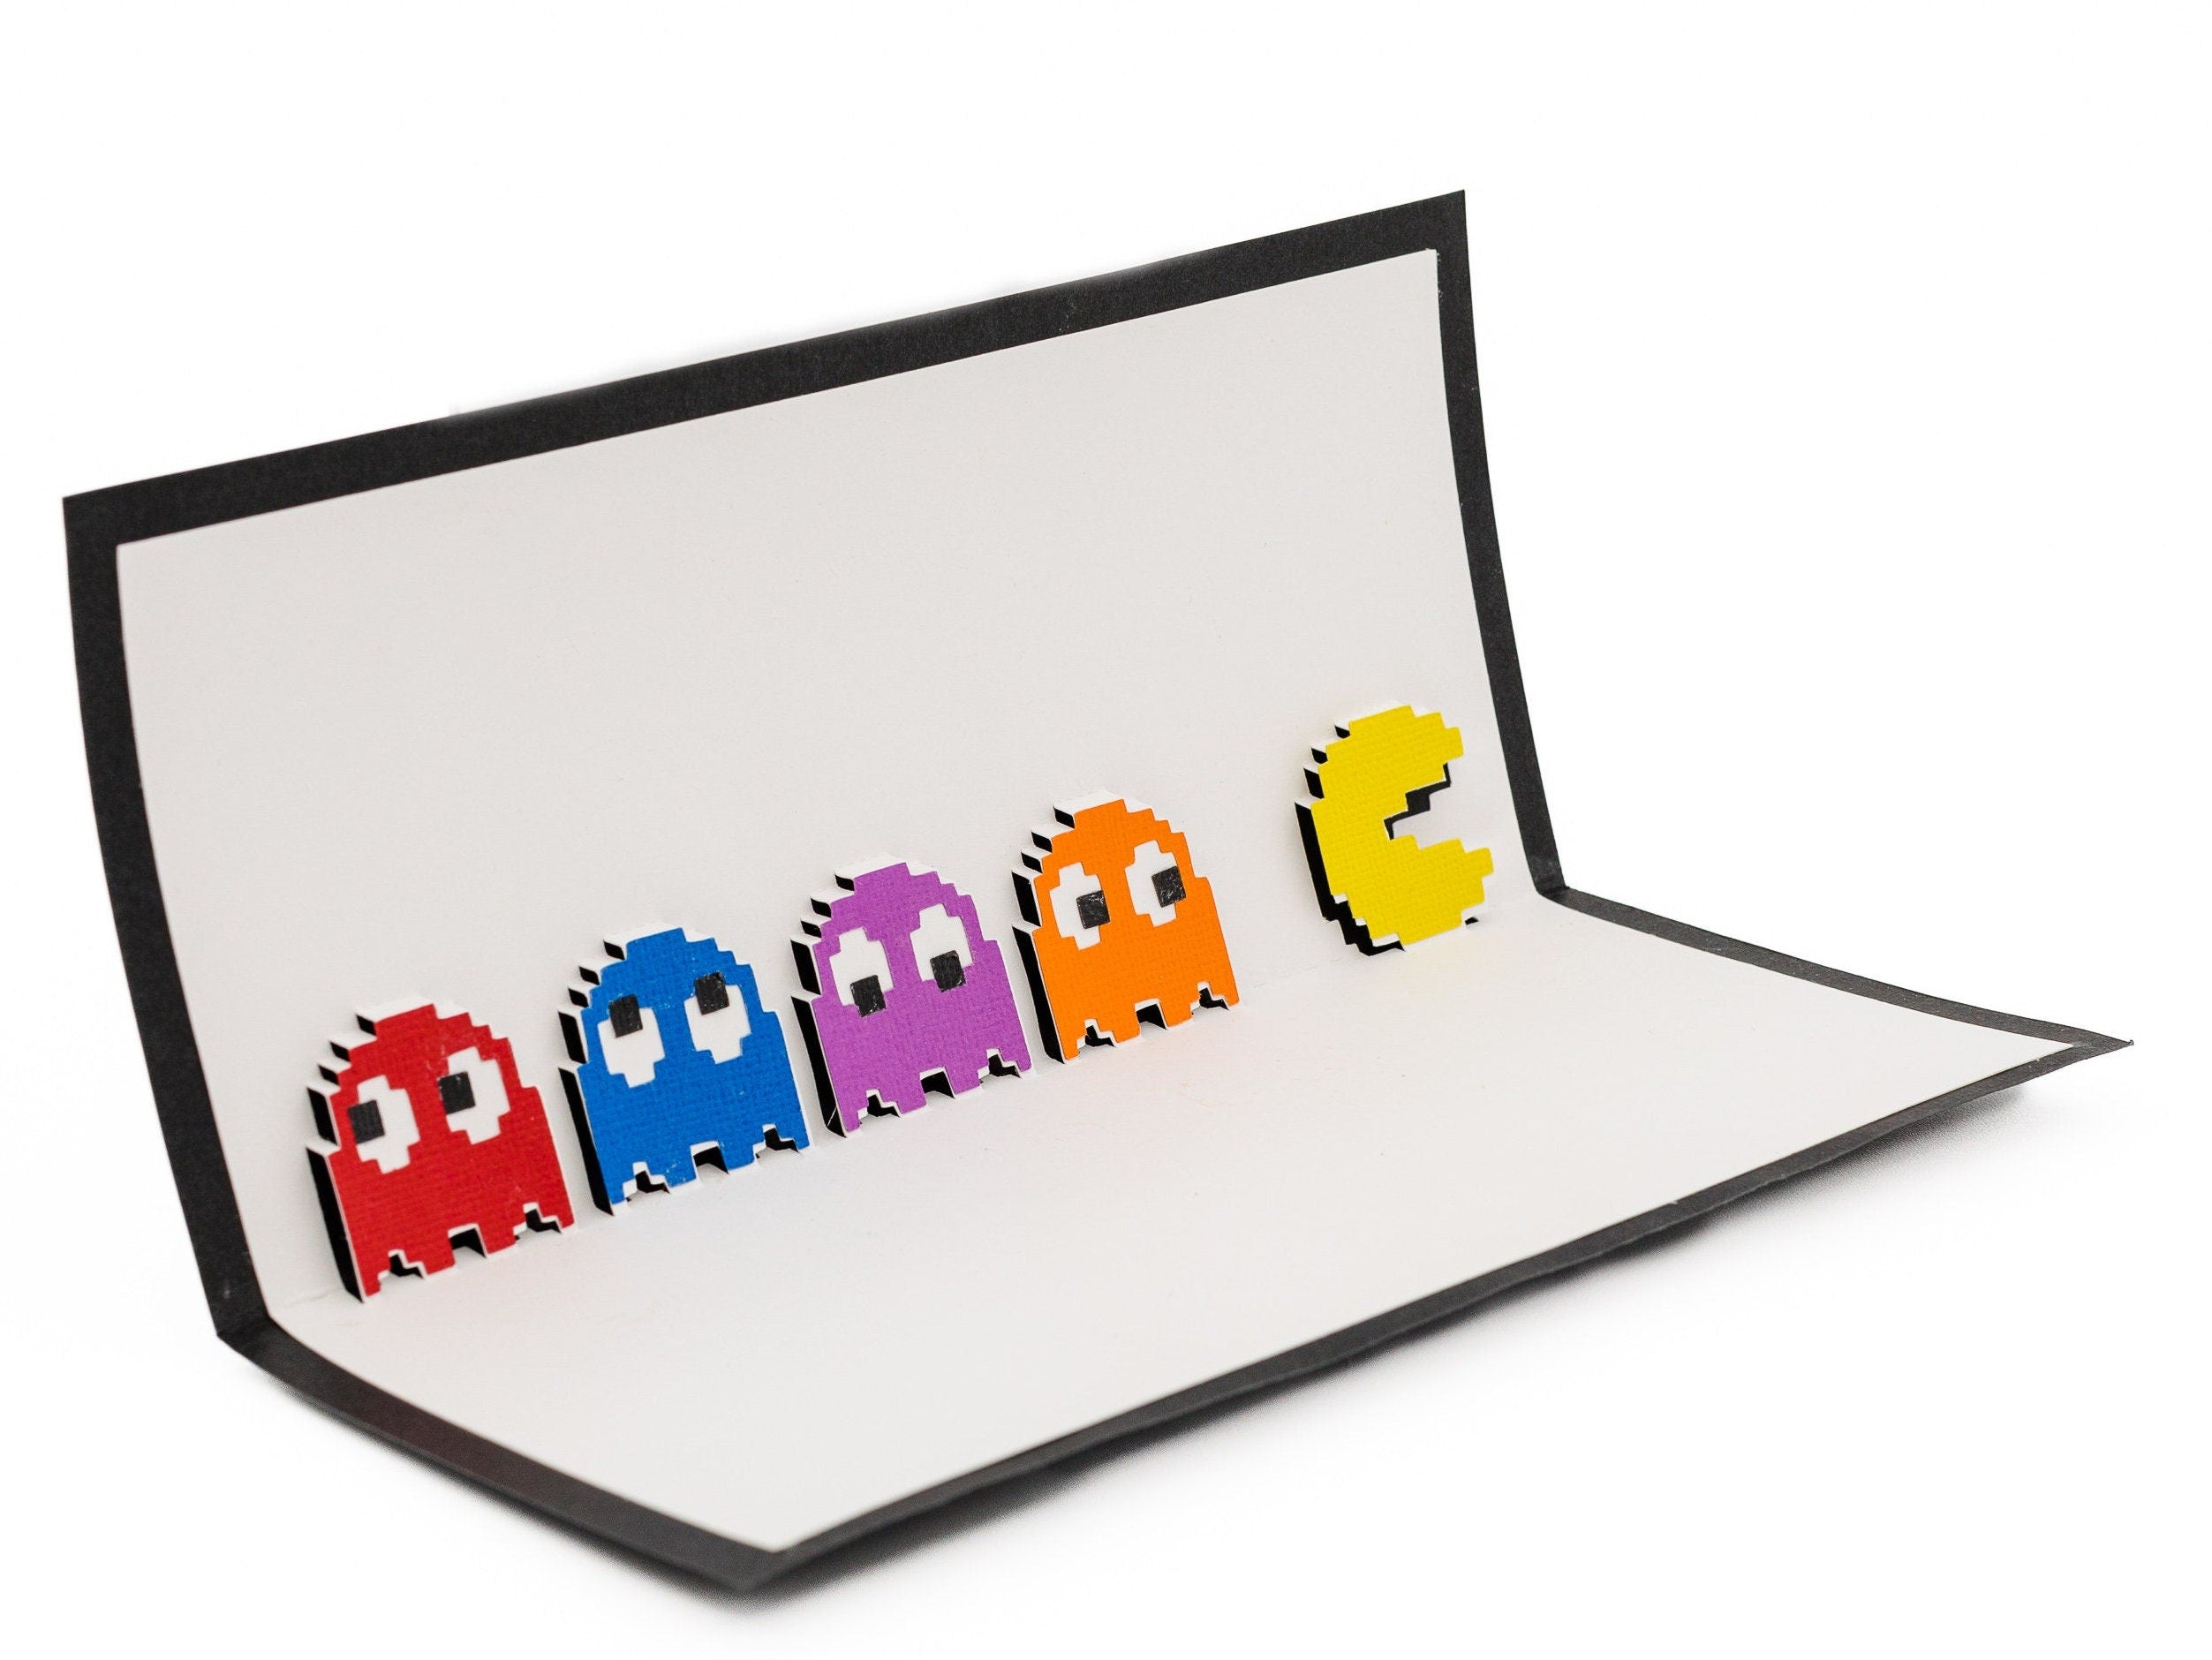 Pac-Man Chasing Ghost Pop Up 3D Greeting Card 8 Bit Video Game Ghost Gamer Arcade Inky Pinky Blinky Clyde